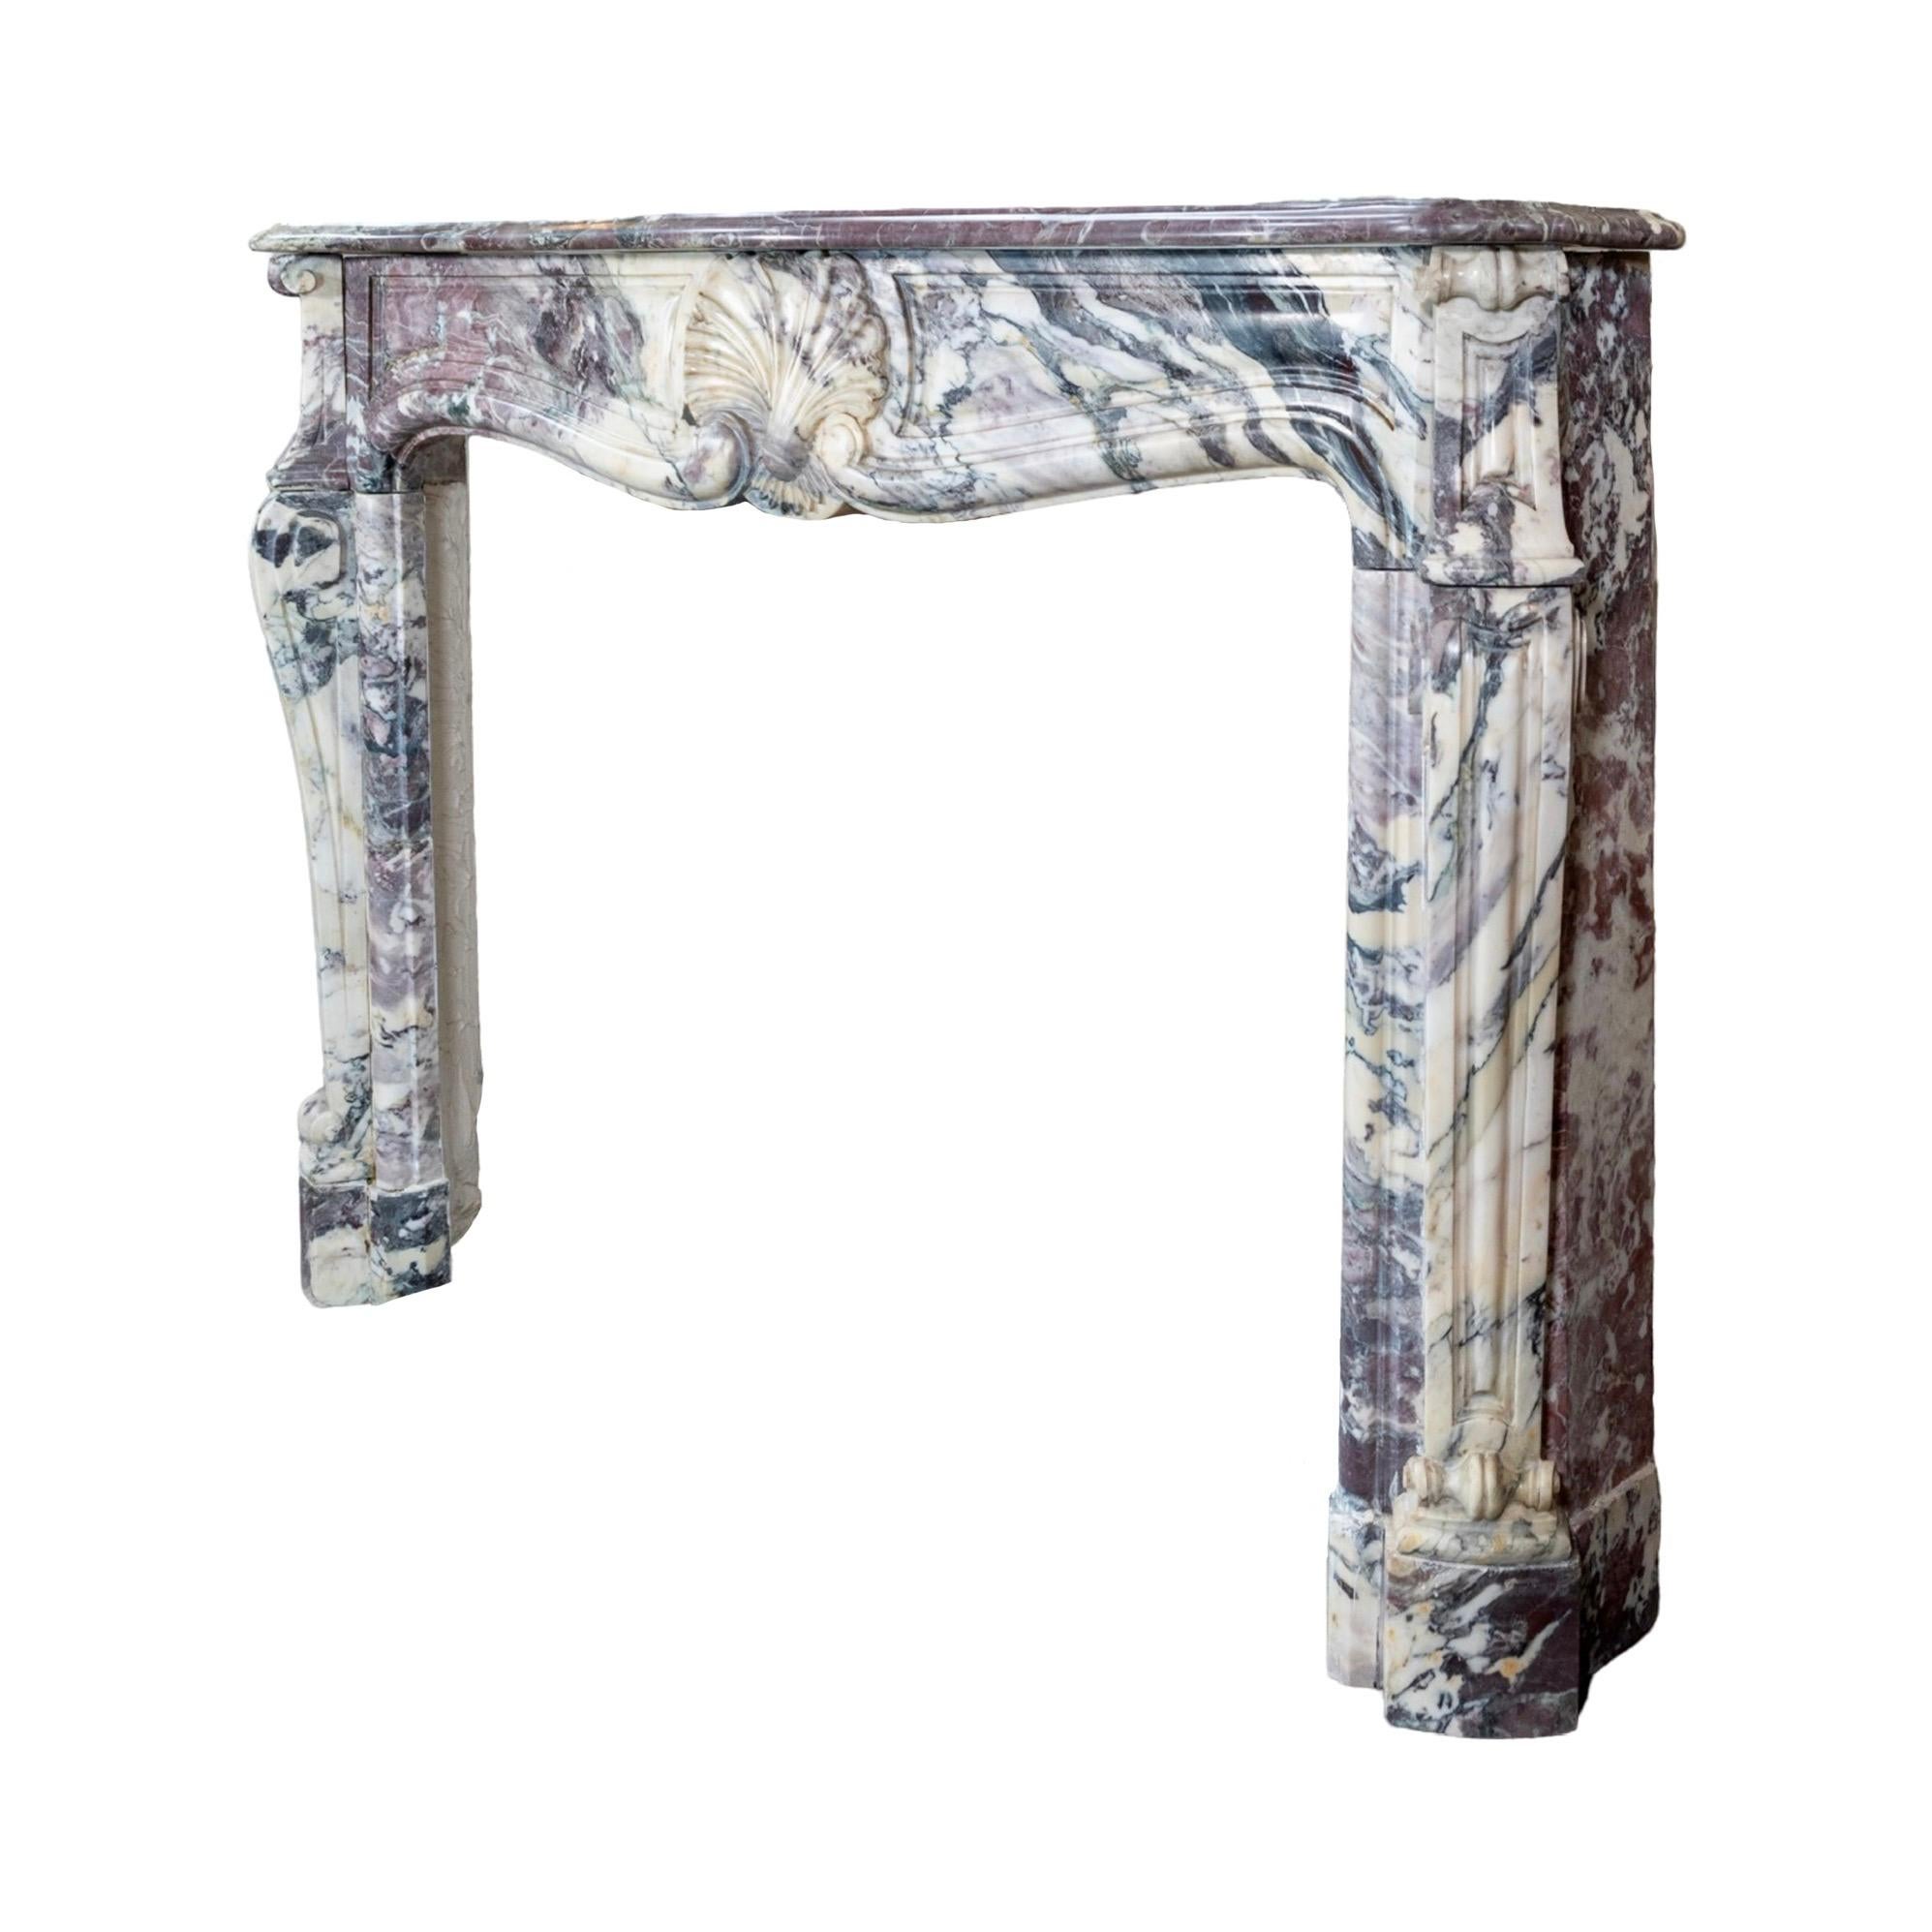 French Villefranche Peach Flower Marble Mantel For Sale 2